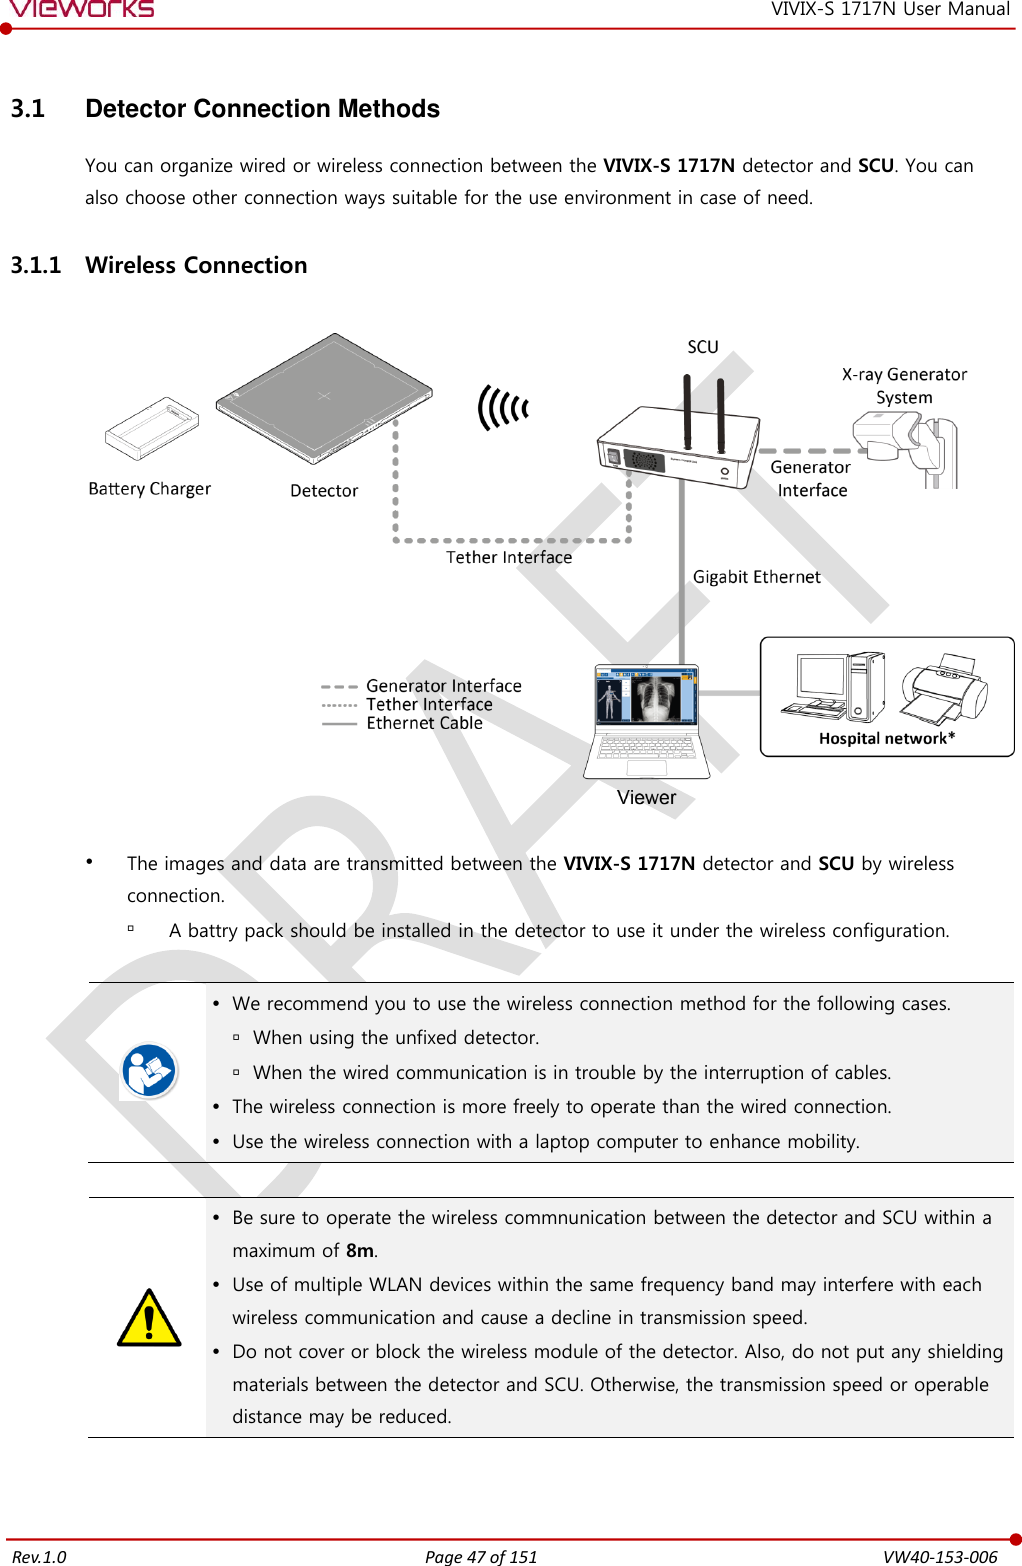   Rev.1.0 Page 47 of 151  VW40-153-006 VIVIX-S 1717N User Manual 3.1  Detector Connection Methods You can organize wired or wireless connection between the VIVIX-S 1717N detector and SCU. You can also choose other connection ways suitable for the use environment in case of need. 3.1.1 Wireless Connection     The images and data are transmitted between the VIVIX-S 1717N detector and SCU by wireless connection.  A battry pack should be installed in the detector to use it under the wireless configuration.    We recommend you to use the wireless connection method for the following cases.  When using the unfixed detector.  When the wired communication is in trouble by the interruption of cables.  The wireless connection is more freely to operate than the wired connection.  Use the wireless connection with a laptop computer to enhance mobility.    Be sure to operate the wireless commnunication between the detector and SCU within a maximum of 8m.  Use of multiple WLAN devices within the same frequency band may interfere with each wireless communication and cause a decline in transmission speed.  Do not cover or block the wireless module of the detector. Also, do not put any shielding materials between the detector and SCU. Otherwise, the transmission speed or operable distance may be reduced.  